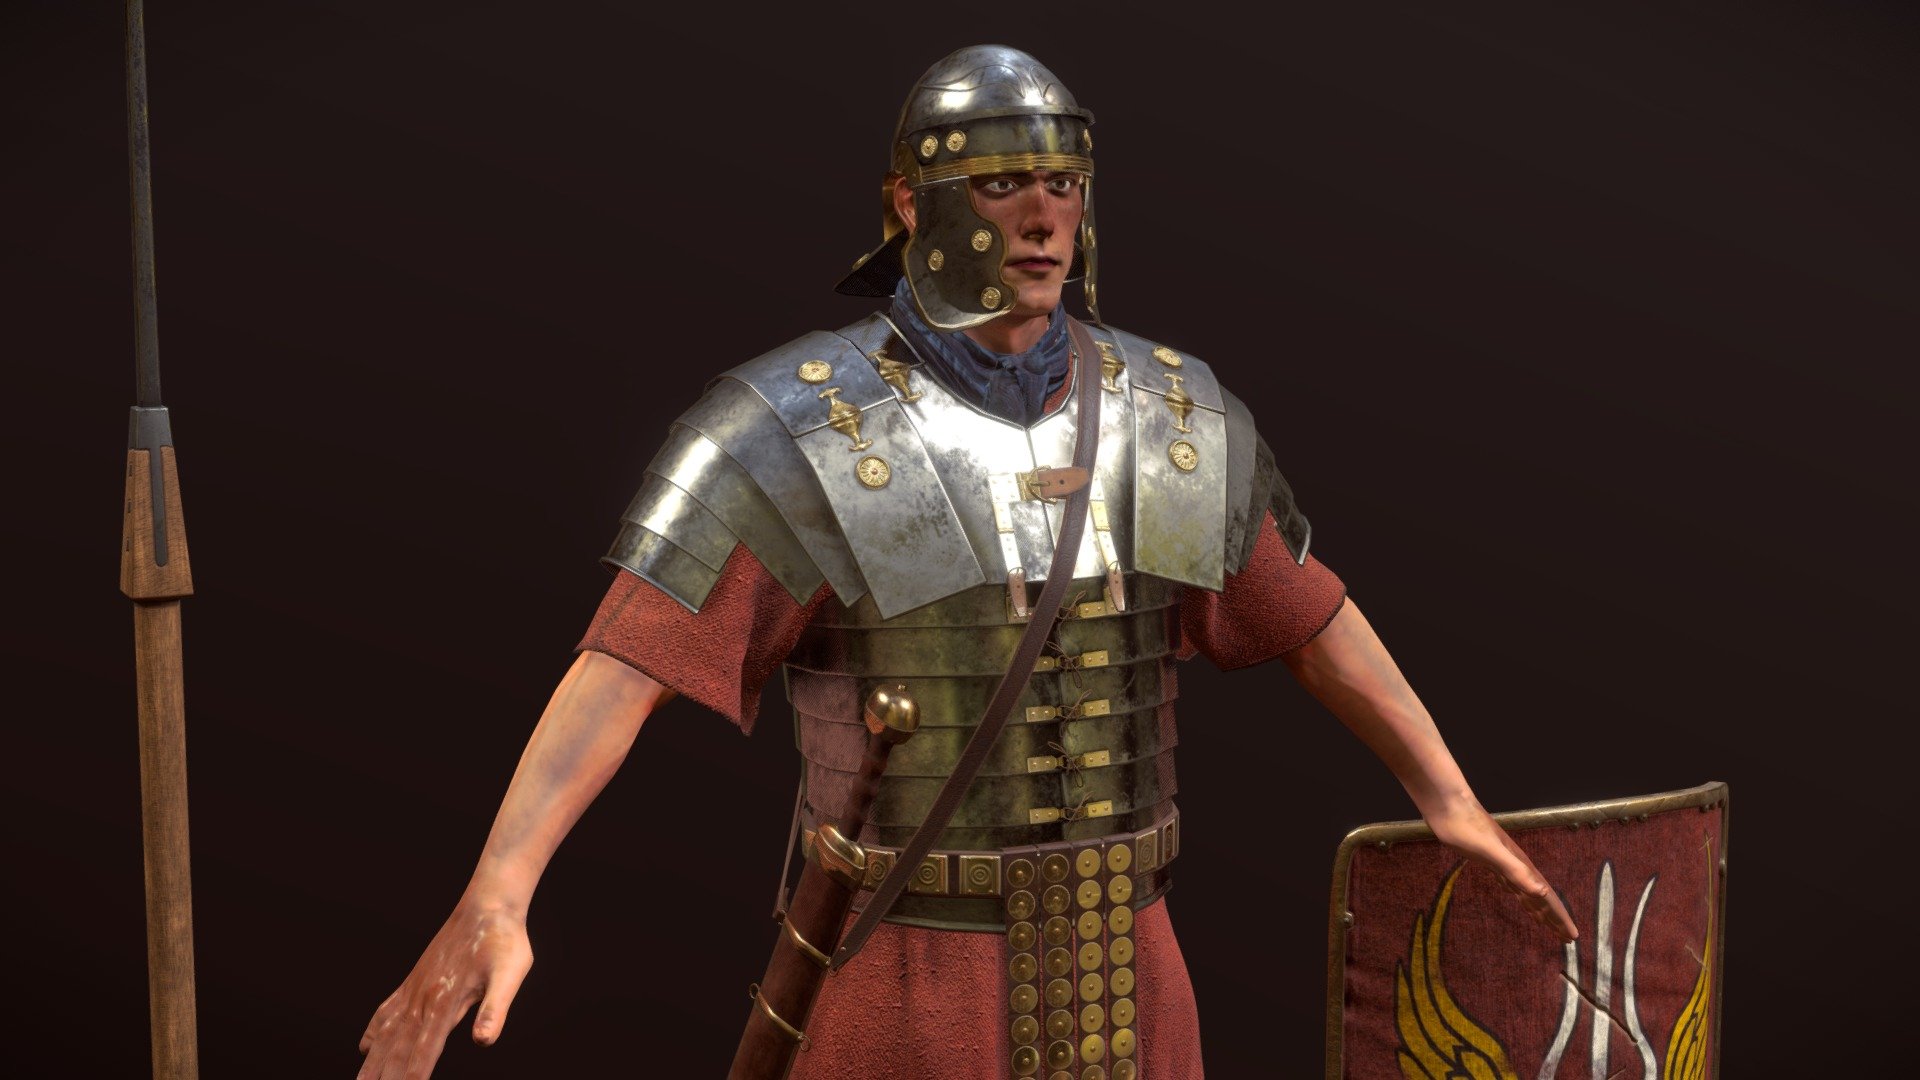 High quality Low poly 3d model of an 1st Century Roman Legionary. The model is accurately modeled in high poly using marvellous designer and then fixed in Blender. The textures are made in Substance Painter. THE MODEL IS PROVIDED WITH A MIXAMO RIG AND MIXAMO ANIMATIONS. THE RIG IS MADE [FOR] BLENDER AND MAY NOT WORK WITH OTHER SOFTWARE. You can use all animations from action editor in Blender. All the proportions are based on the model of 1,80-meter man. All the textures are provided in 4K Resolution.

included :
* Lorica Segmentata
* Tunic
* Galea Helmet
* Gladius
* Pilum (Spear)
* Scutum (Shield)
* Caligae
* 4K Textures

Animations:
* Idle
* Walk
* Run
* Slash
* Impact - ROMAN LEGIONARY RIGGED-ANIMATED - 3D model by Moony_State 3d model